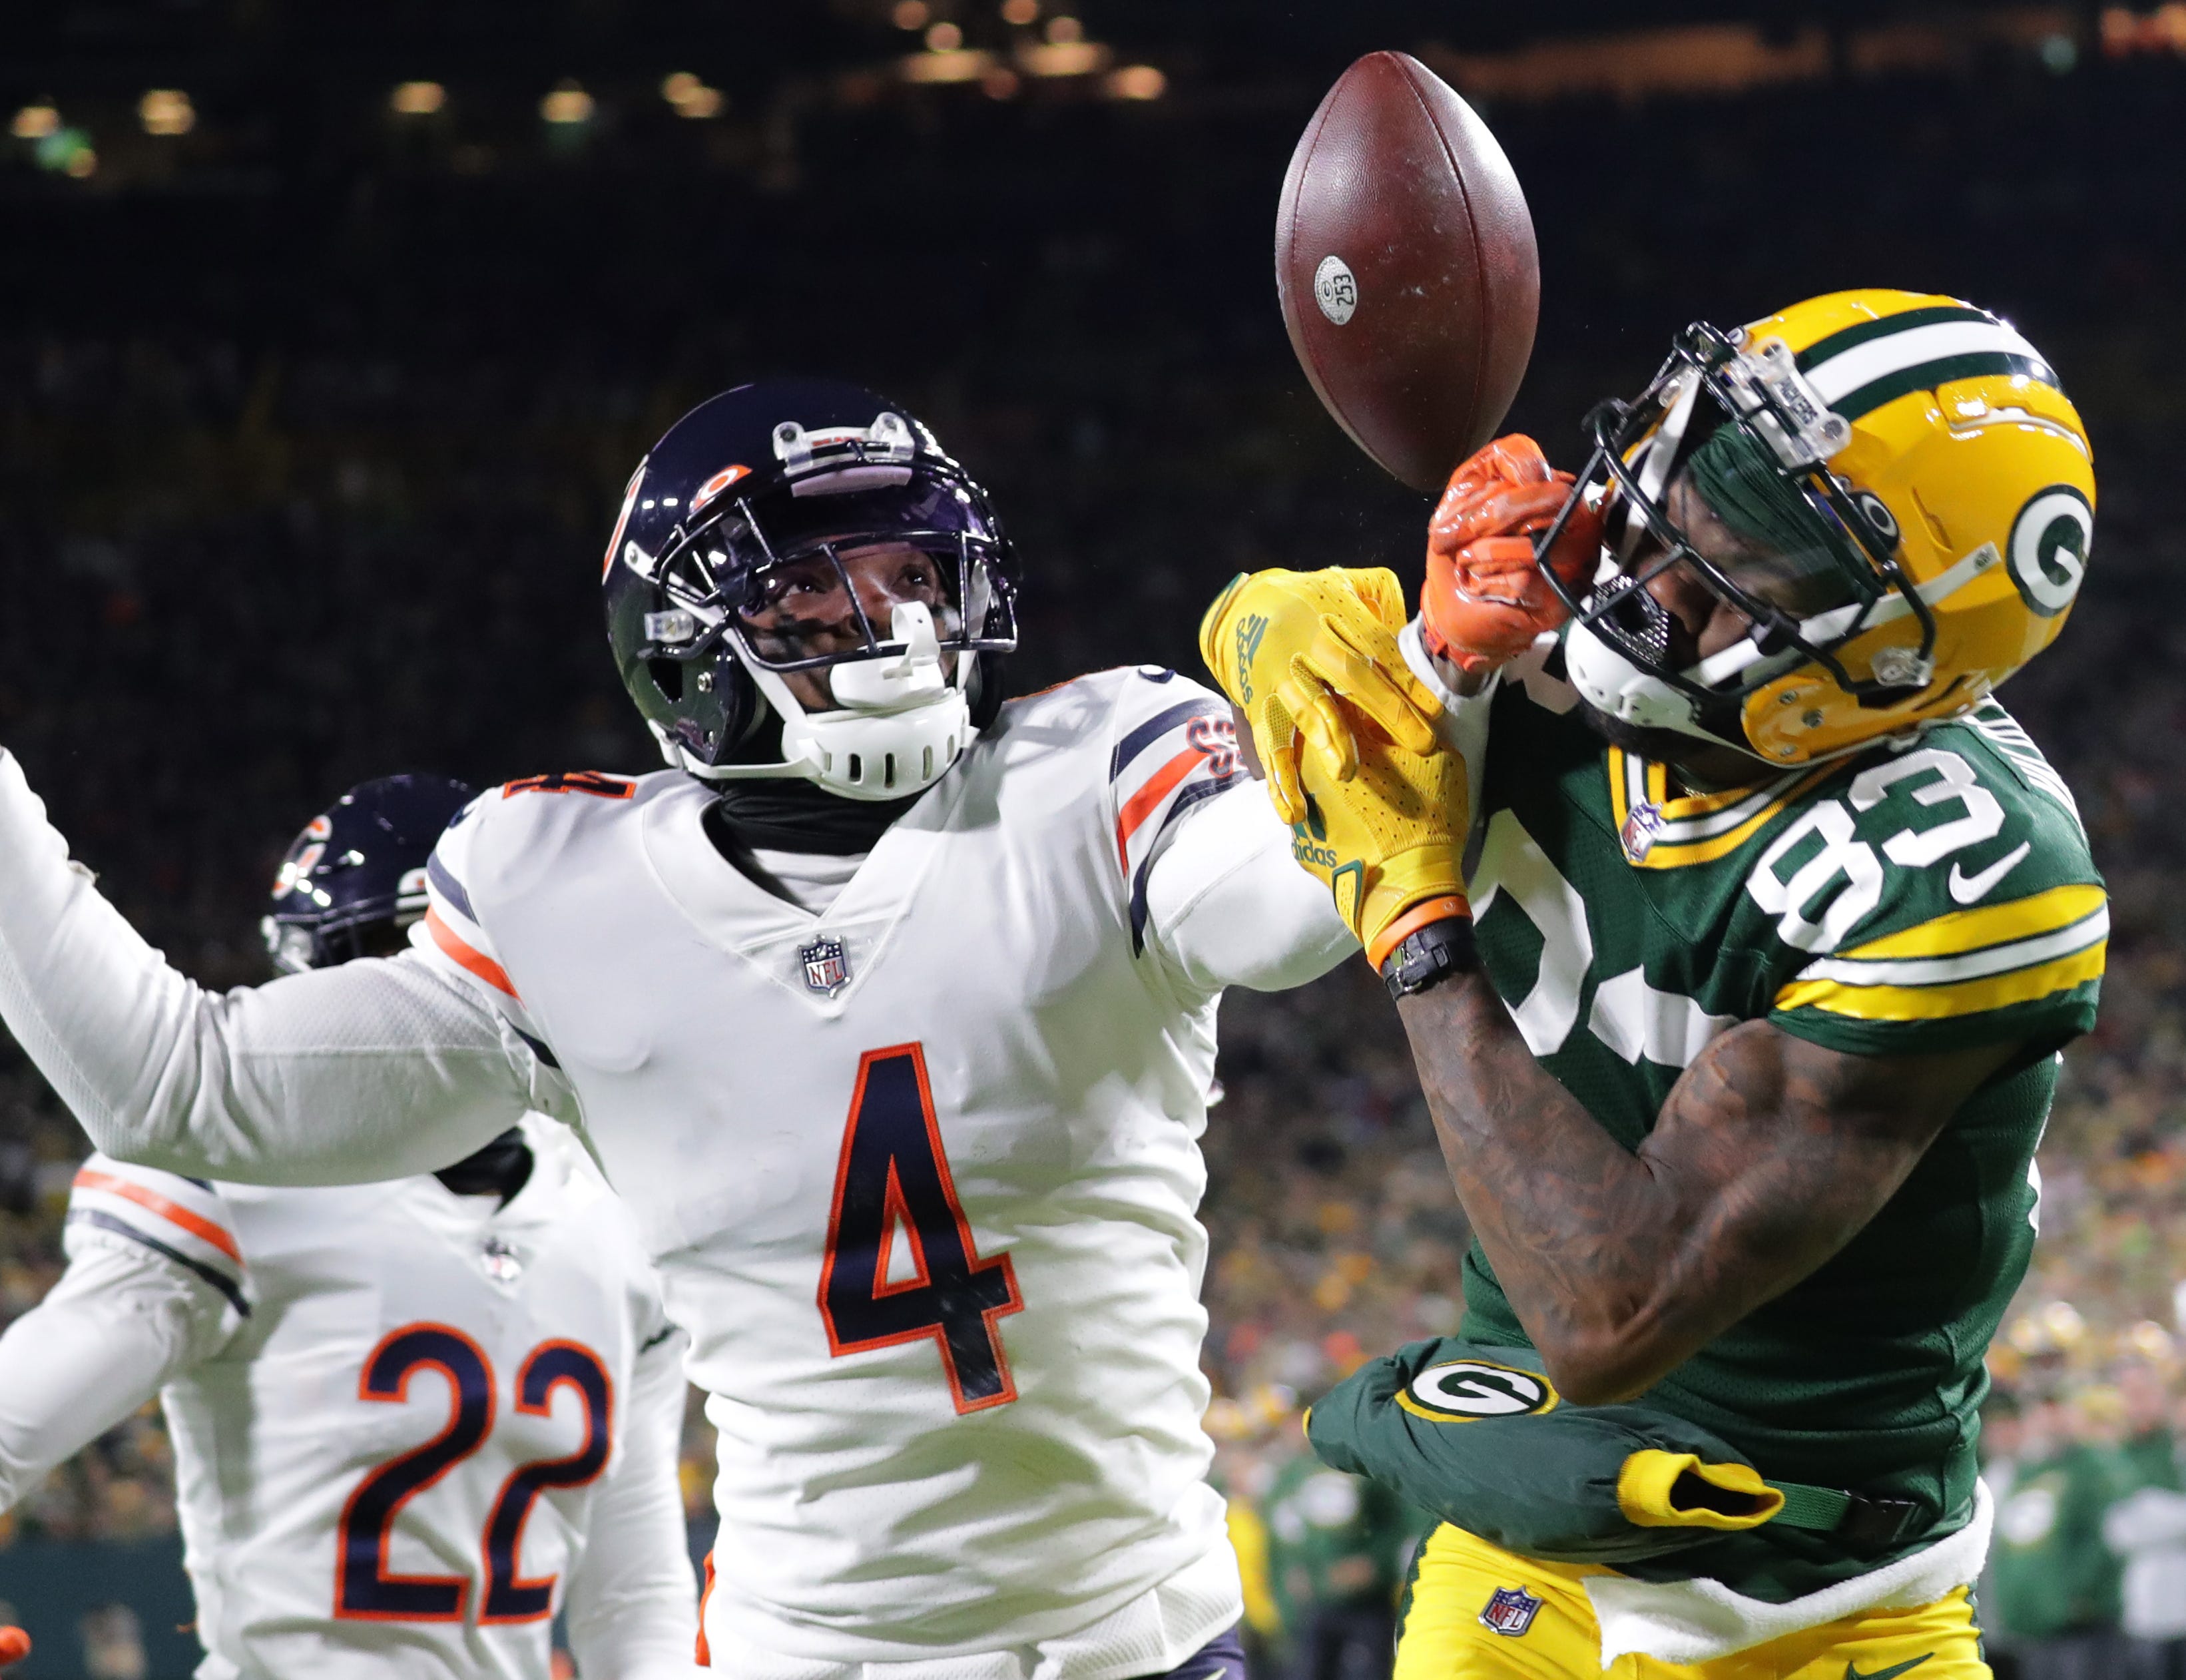 Chicago Bears safety Eddie Jackson (4) break up a pas sin the end zone intended for Green Bay Packers wide receiver Marquez Valdes-Scantling (83) during the second  quarter of their game Sunday, December 12, 2021 at Lambeau Field in Green Bay, Wis. The Green Bay Packers beat the Chicago Bears 45-30.